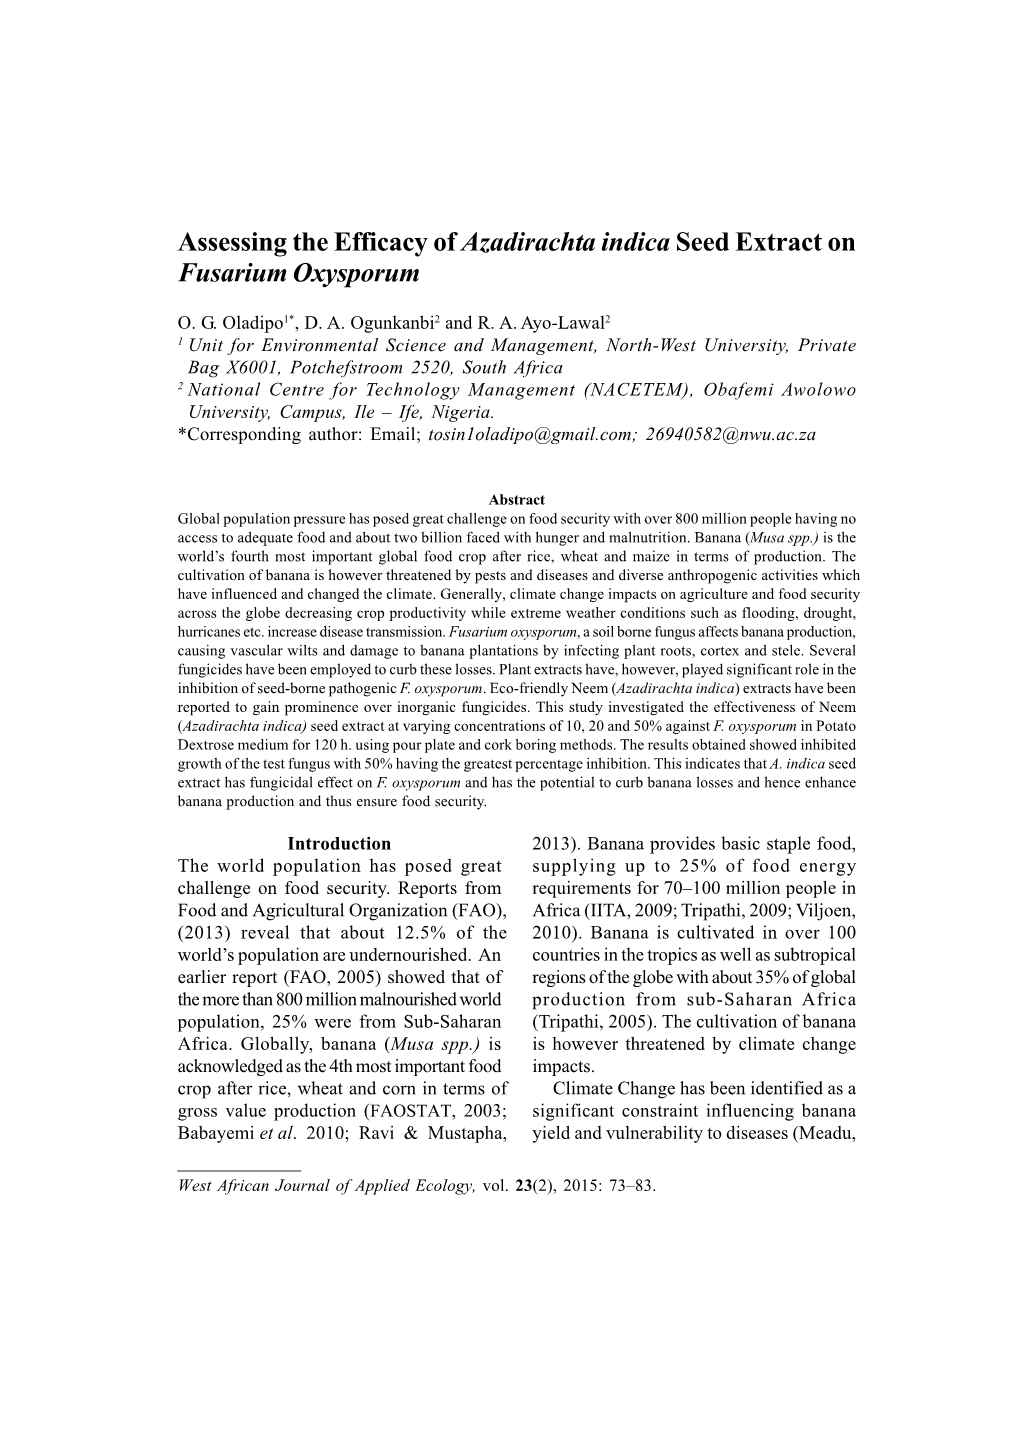 Assessing the Efficacy of Azadirachta Indica Seed Extract on Fusarium Oxysporum 75